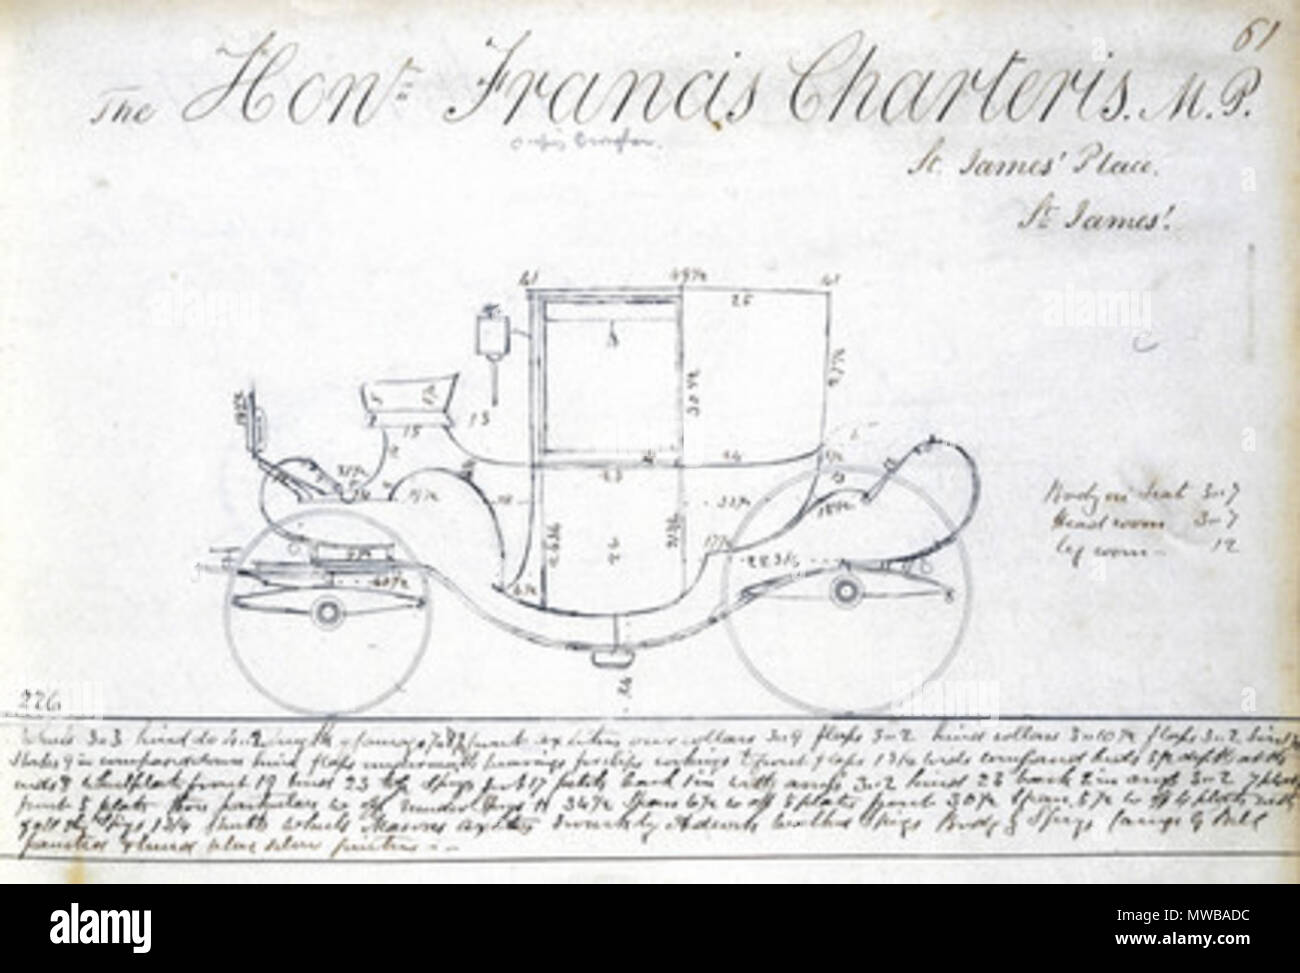 . Francis Charteris' carriage, c 1810-1873 Plate from 'Woodall's Coach Designs', produced between 1810 and 1873, showing a design for a four-wheeled carriage produced for Francis Charteris. 'Woodall's Coach Designs' is a bound volume containing draughtsman's drawings for Woodall the coachmaker of London. 19th century. Unattributed 215 Francis Charteris' carriage, c 1810-1873 Stock Photo